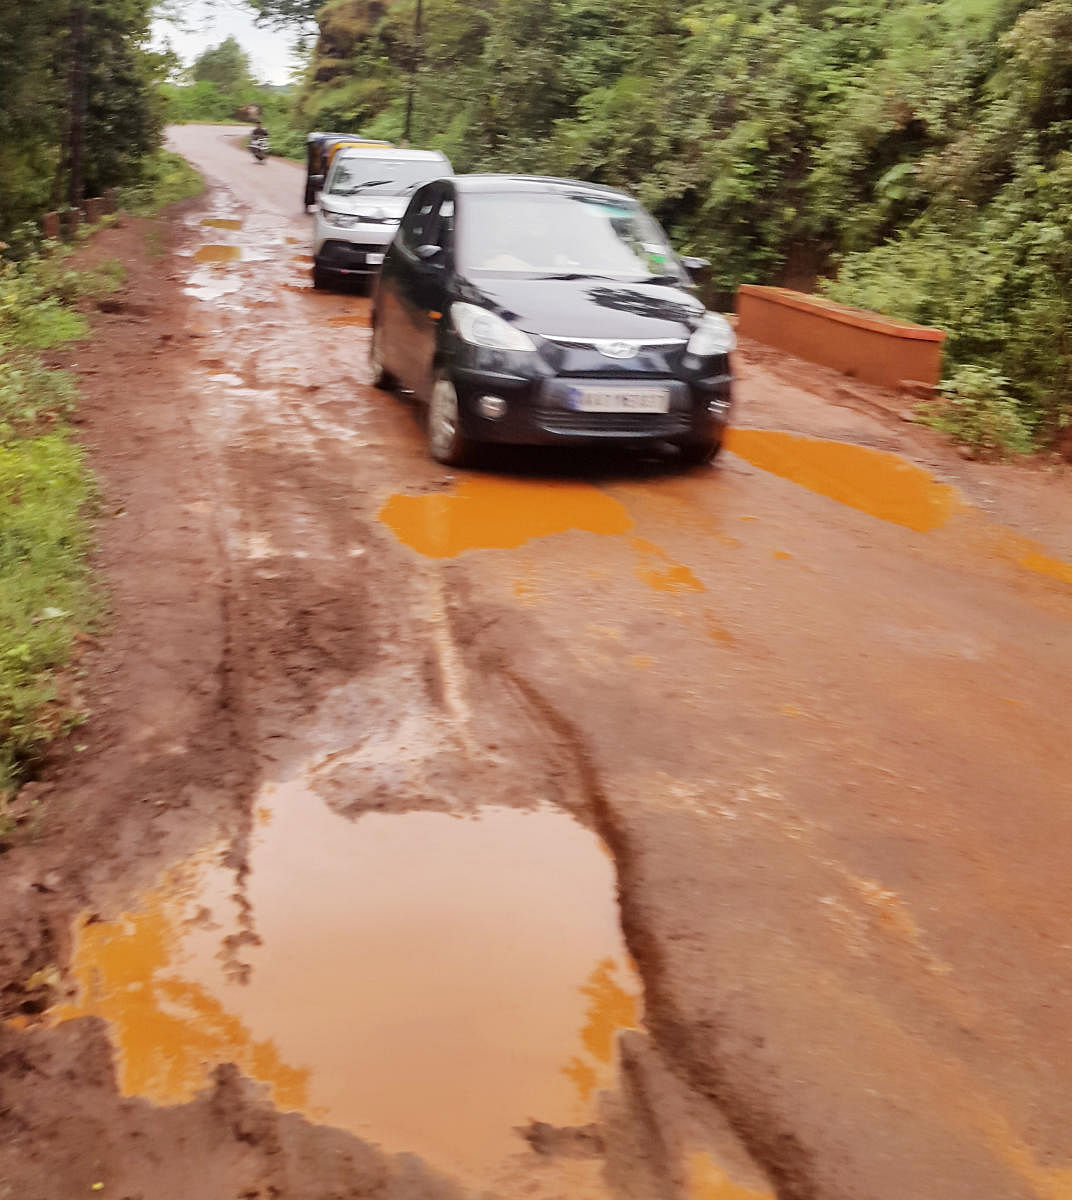 Shoddy clearing of soil affects smooth flow of vehicles